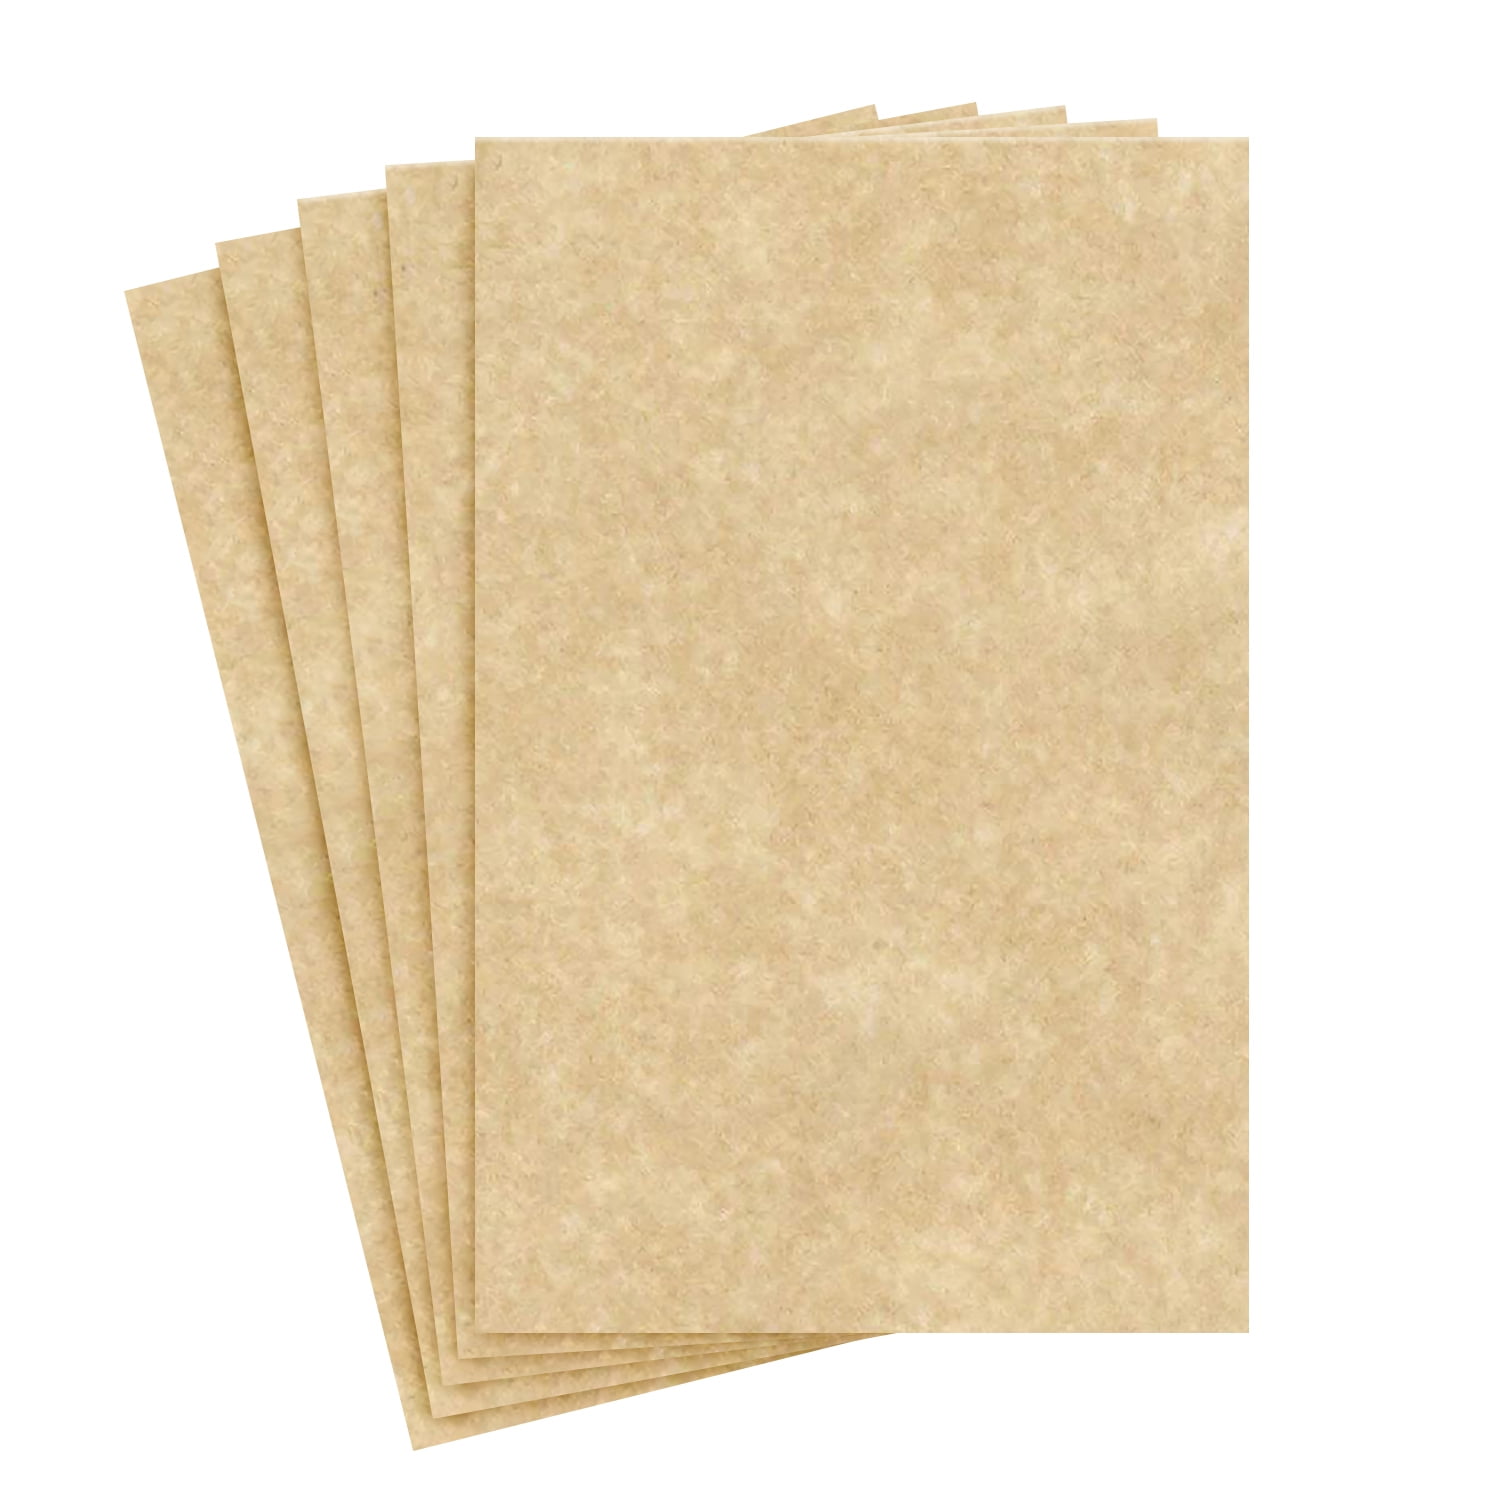  JAM PAPER Parchment 65lb Cardstock - 8.5 x 11 Coverstock - 176  GSM - Natural Recycled - 50 Sheets/Pack : Paper Stationery Envelope Seals :  Arts, Crafts & Sewing